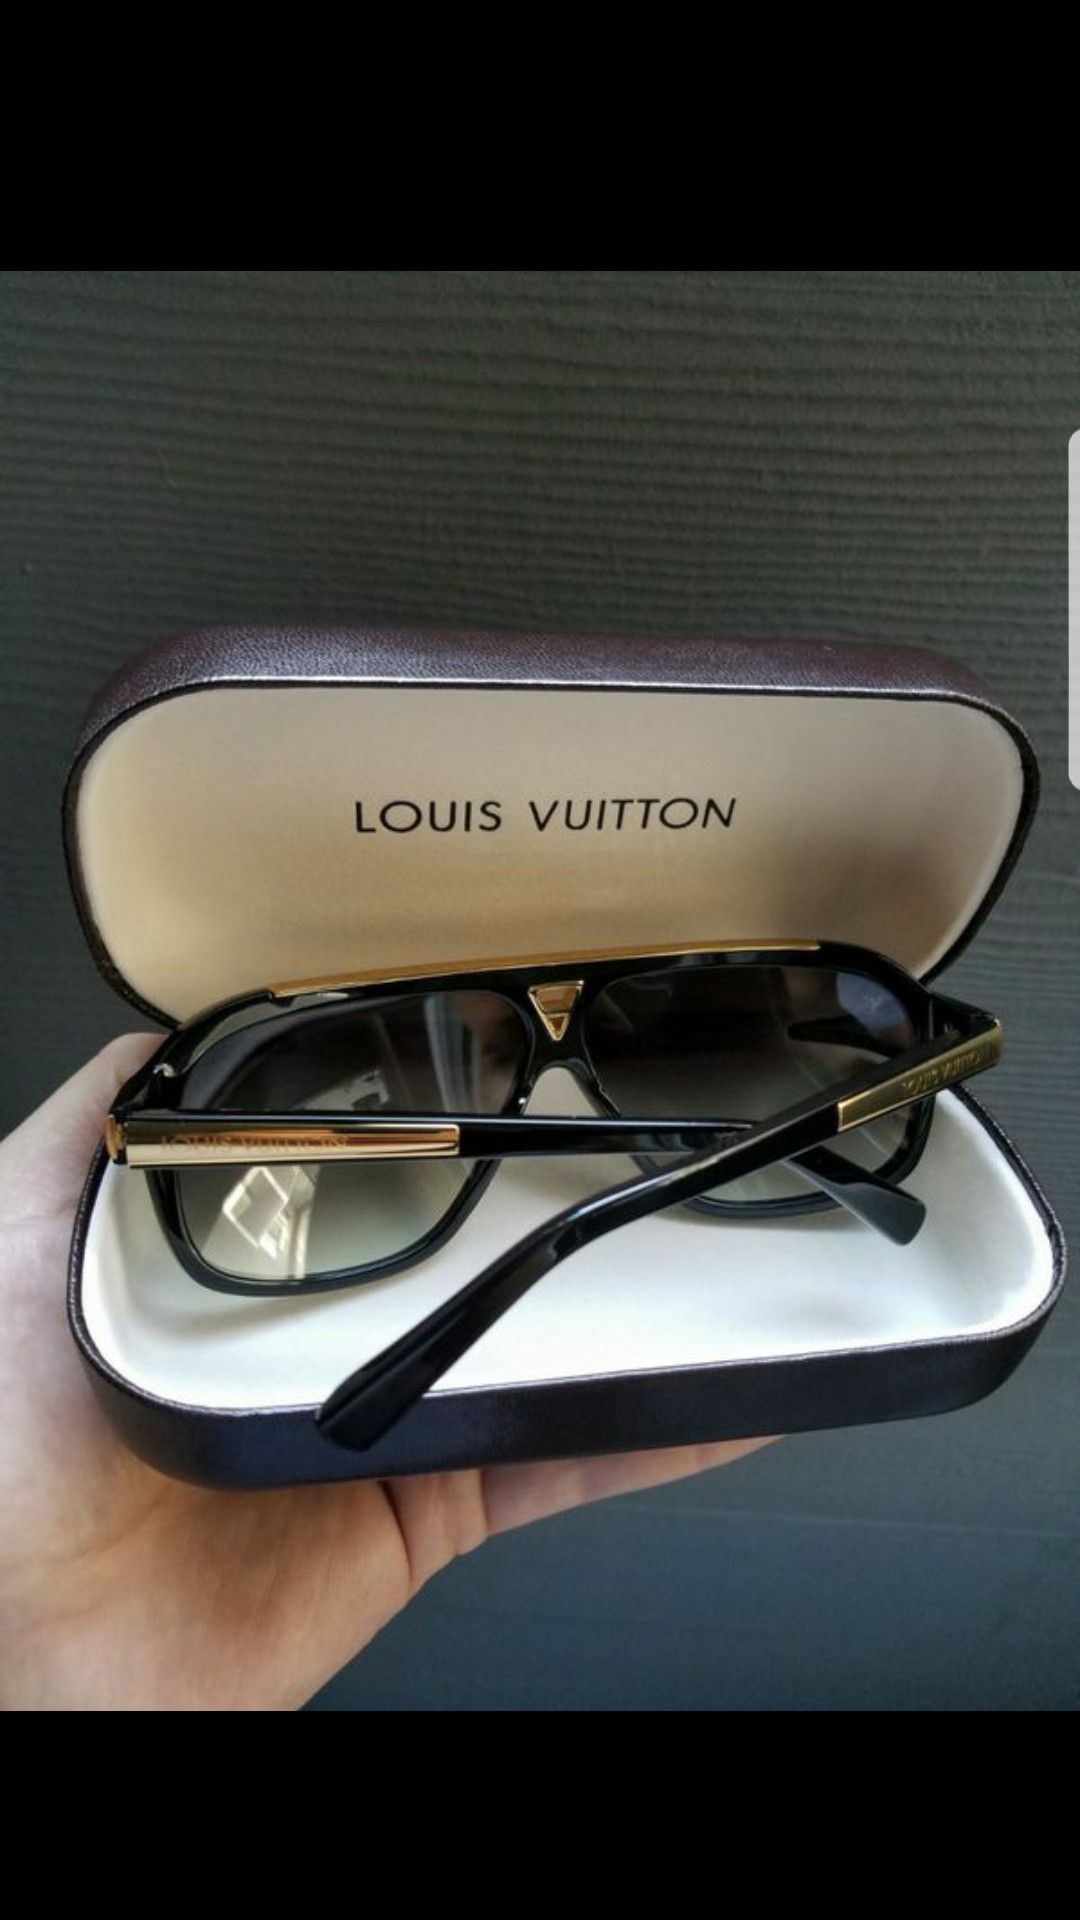 Lentes De Sol CC,GG,Dior And LV for Sale in Vacaville, CA - OfferUp